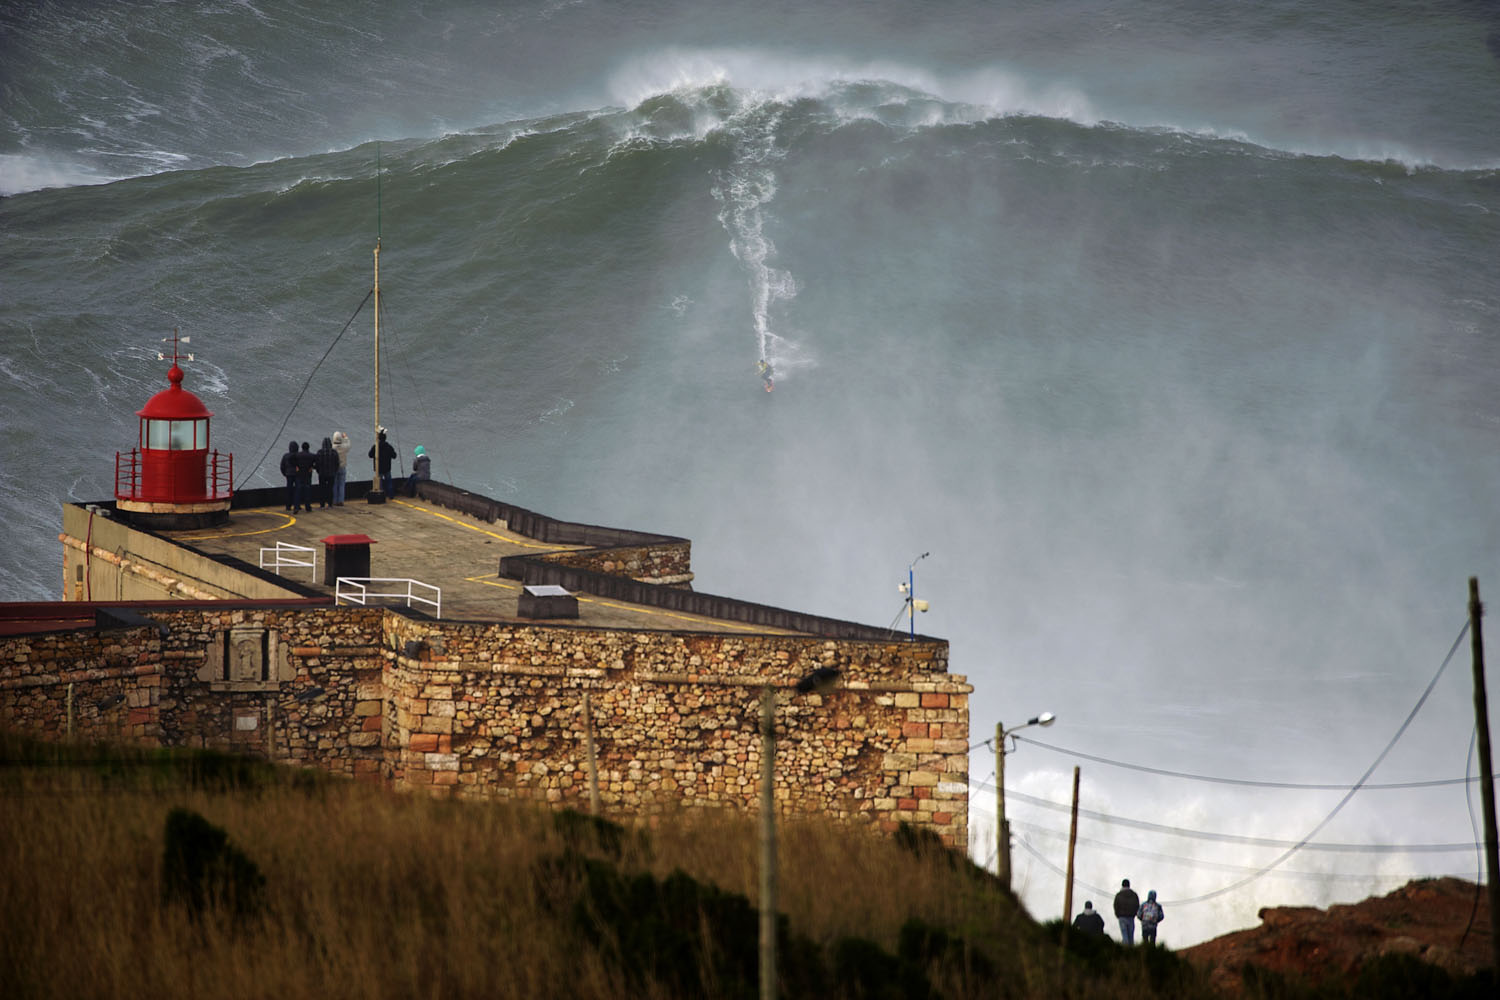 Jan. 28, 2013. U.S. surfer Garrett McNamara rides a wave off Praia do Norte beach in Nazare, Portugal. McNamara is said to have broken his own world record for the largest wave surfed when he caught this wave reported to be around 100ft, off the coast of Nazare. If the claims are verified, it will mean that McNamara, who was born in Pittsfield, Massachusetts but whose family moved to Hawaii's North Shore when he was aged 11, has beaten his previous record, which was also set at Nazare, of 23.77 meters (78 feet) in November 2011. (To Mane—Barcroft Media/Landov)